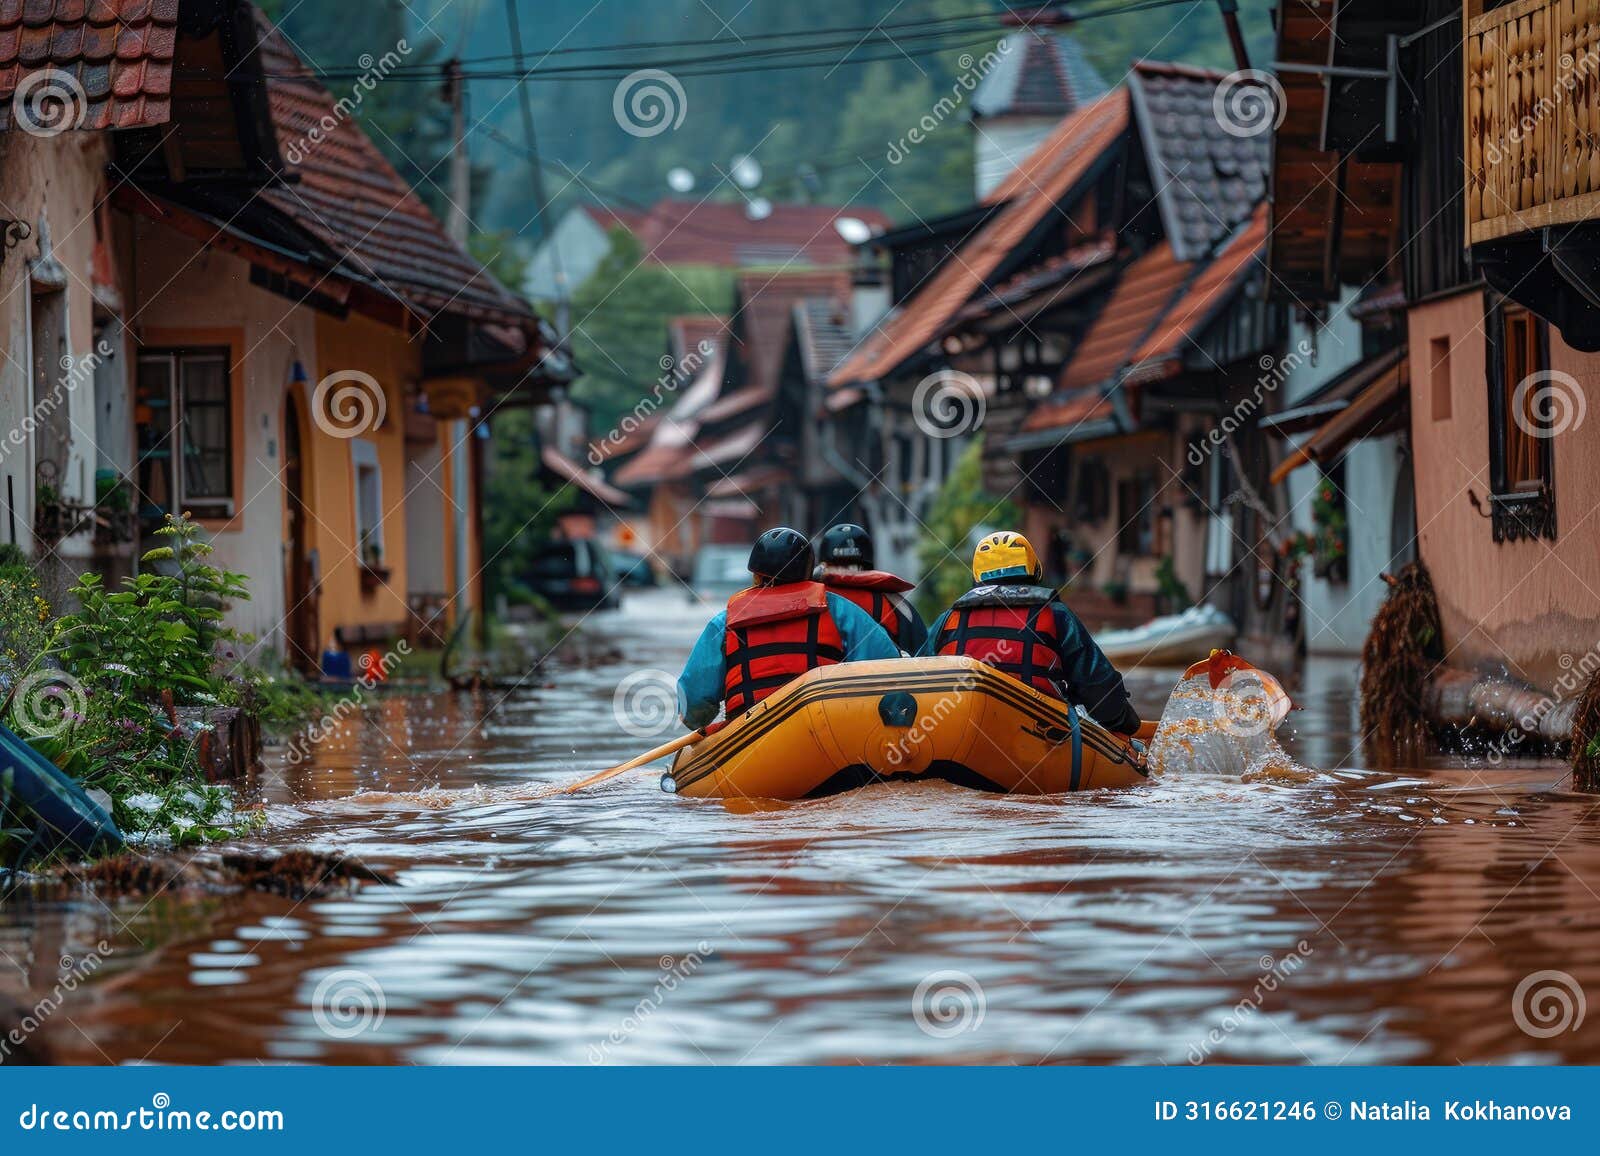 rescue operation. male rescuers sail a boat through the flooded old town during a flood